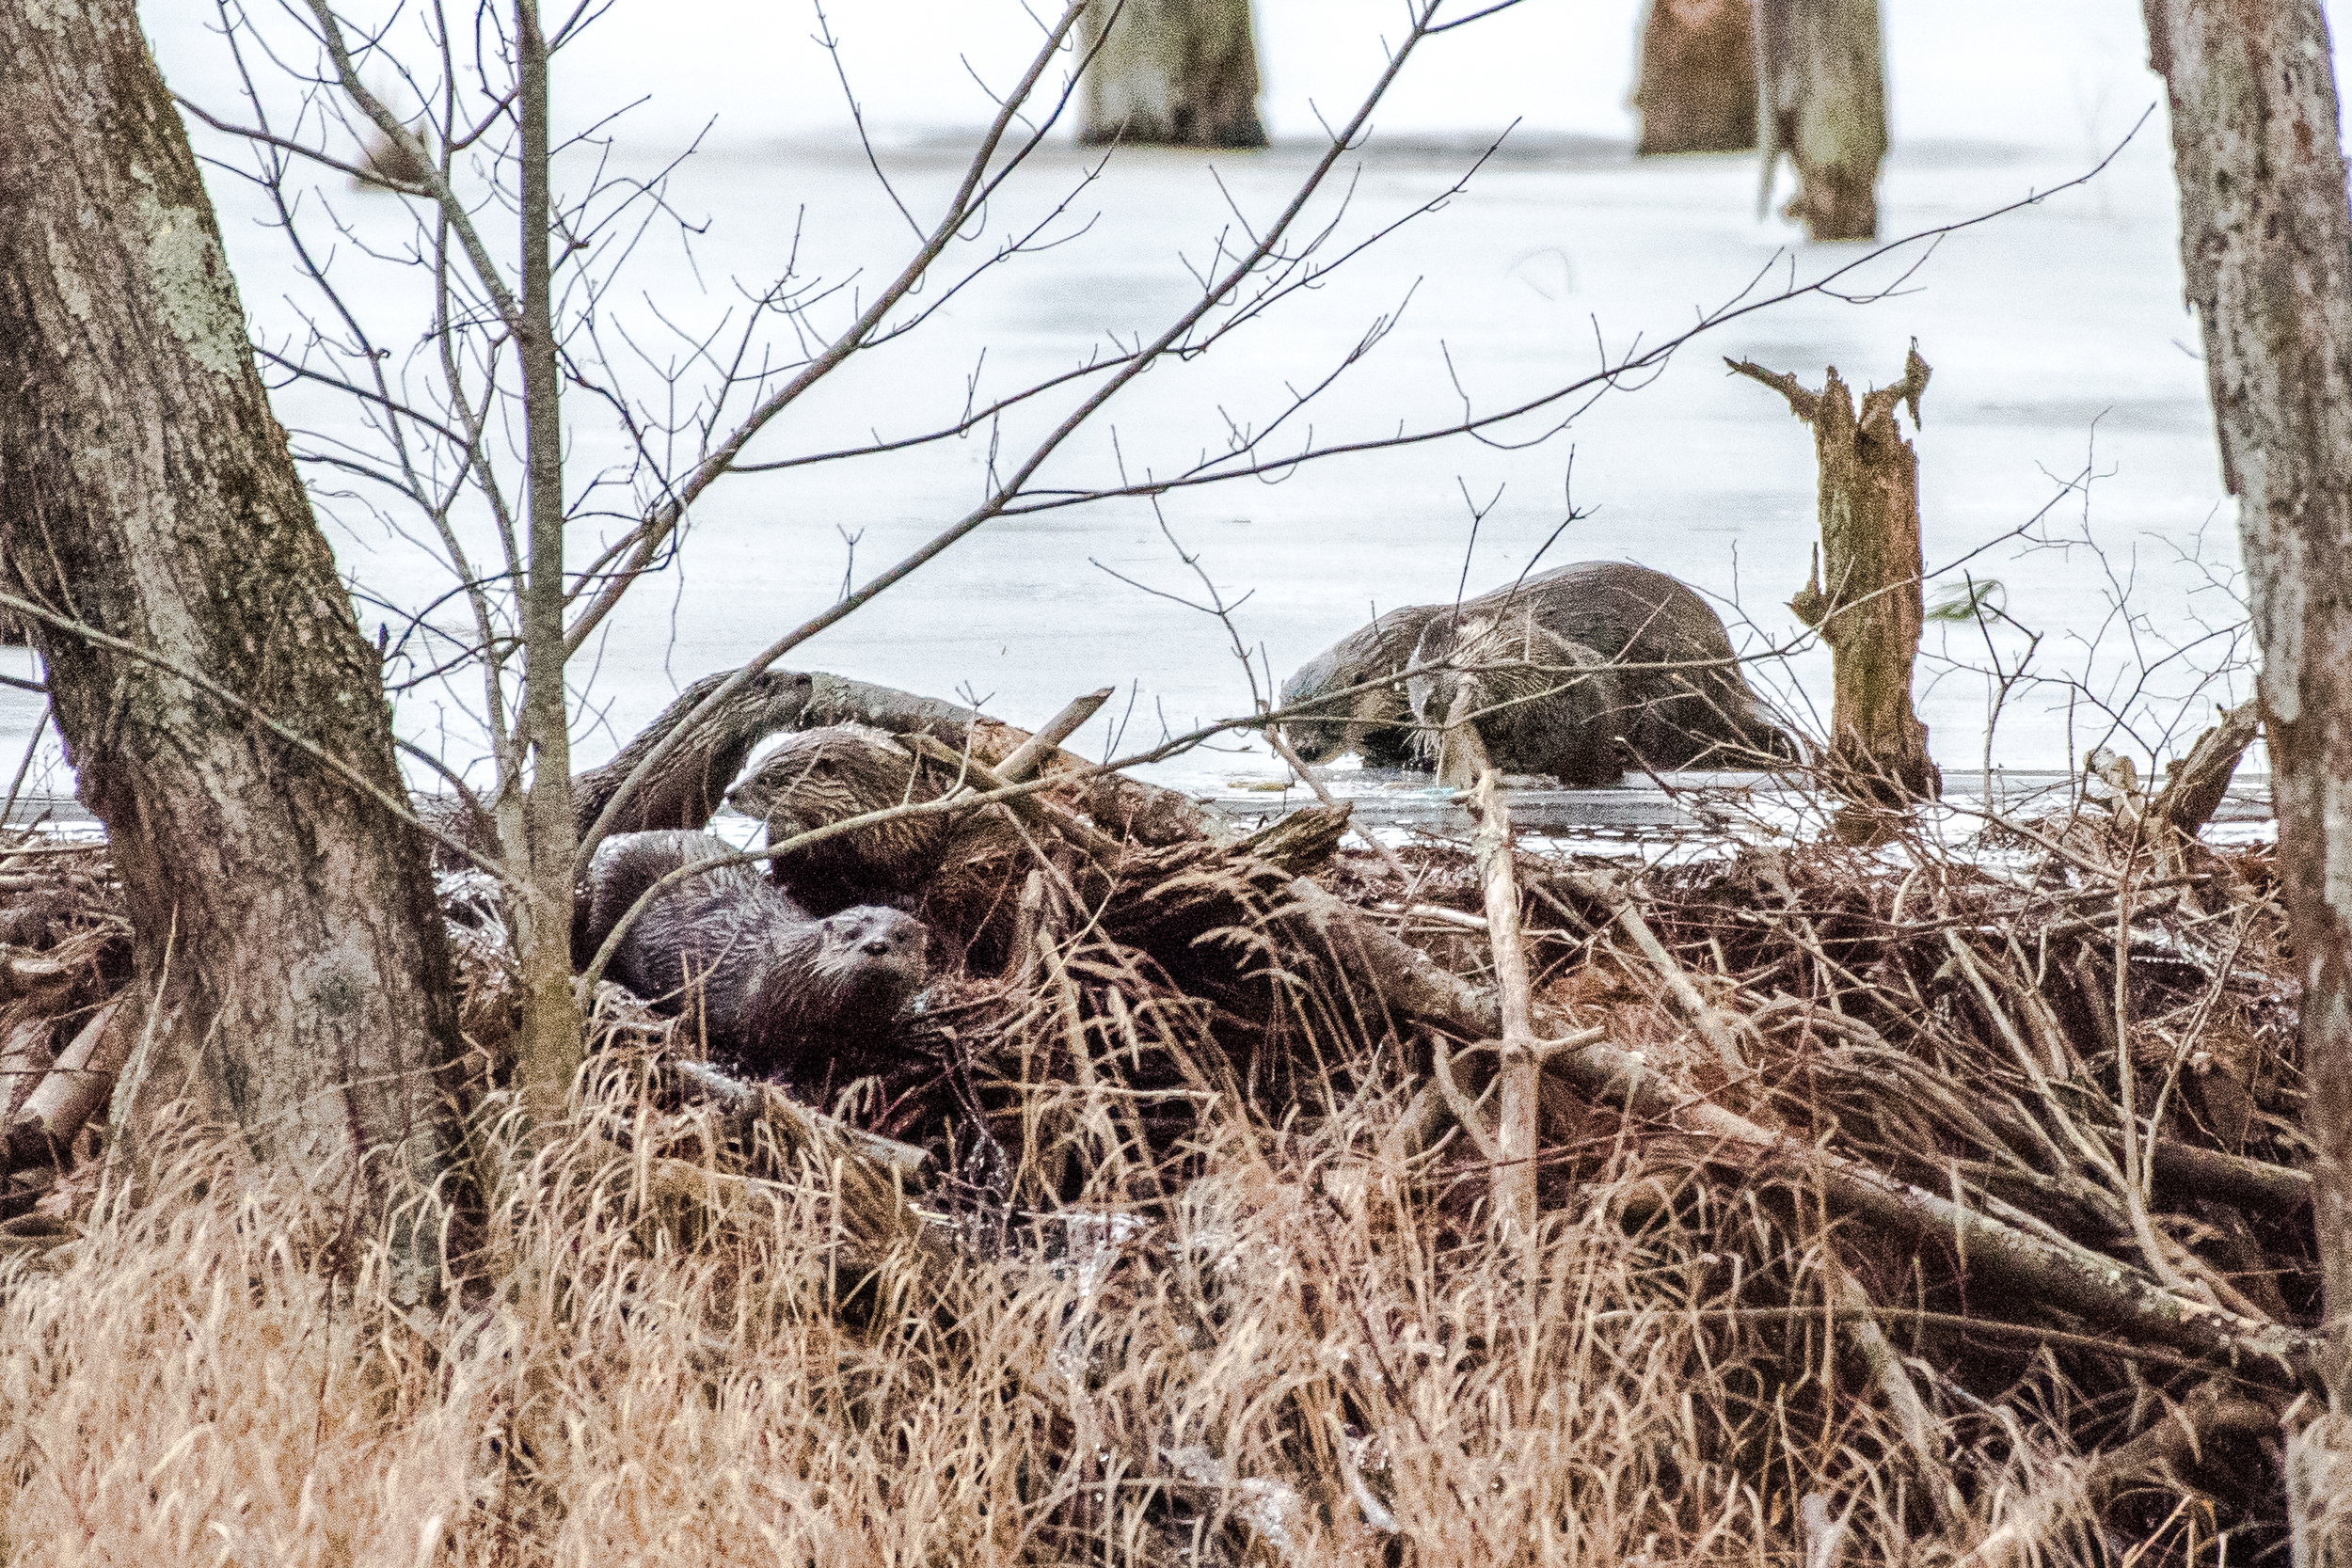   Fresh fish for breakfast. &nbsp;Can you see all 5 otters in this photo? &nbsp;2/23/16  